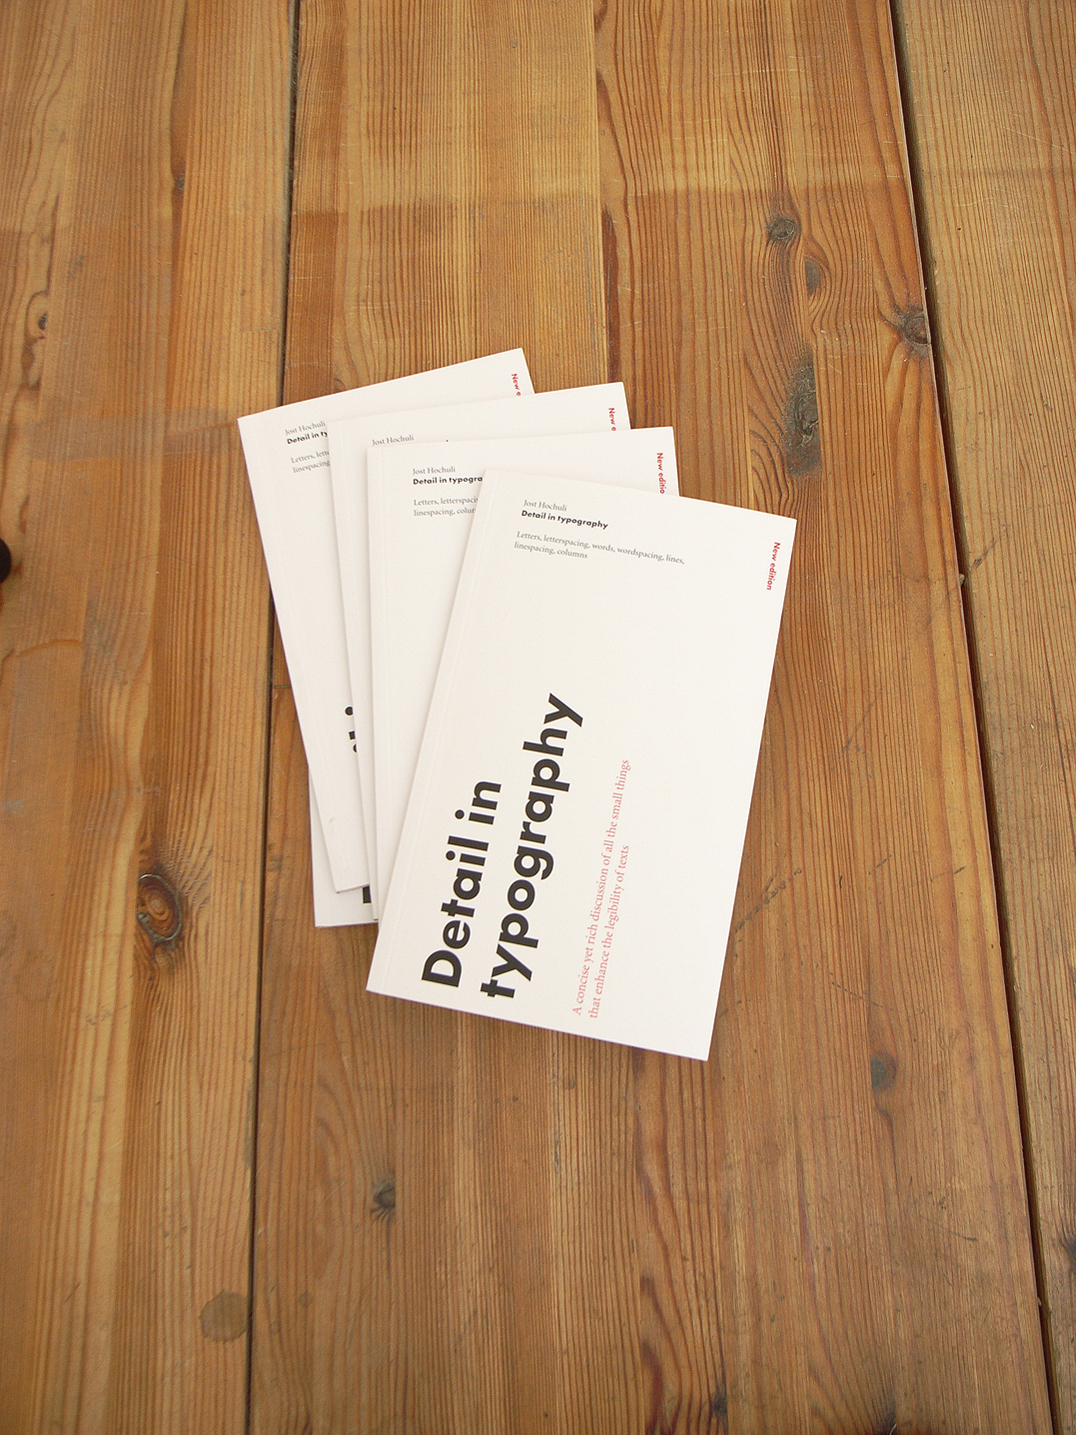 ‘Detail in typography’ arrived